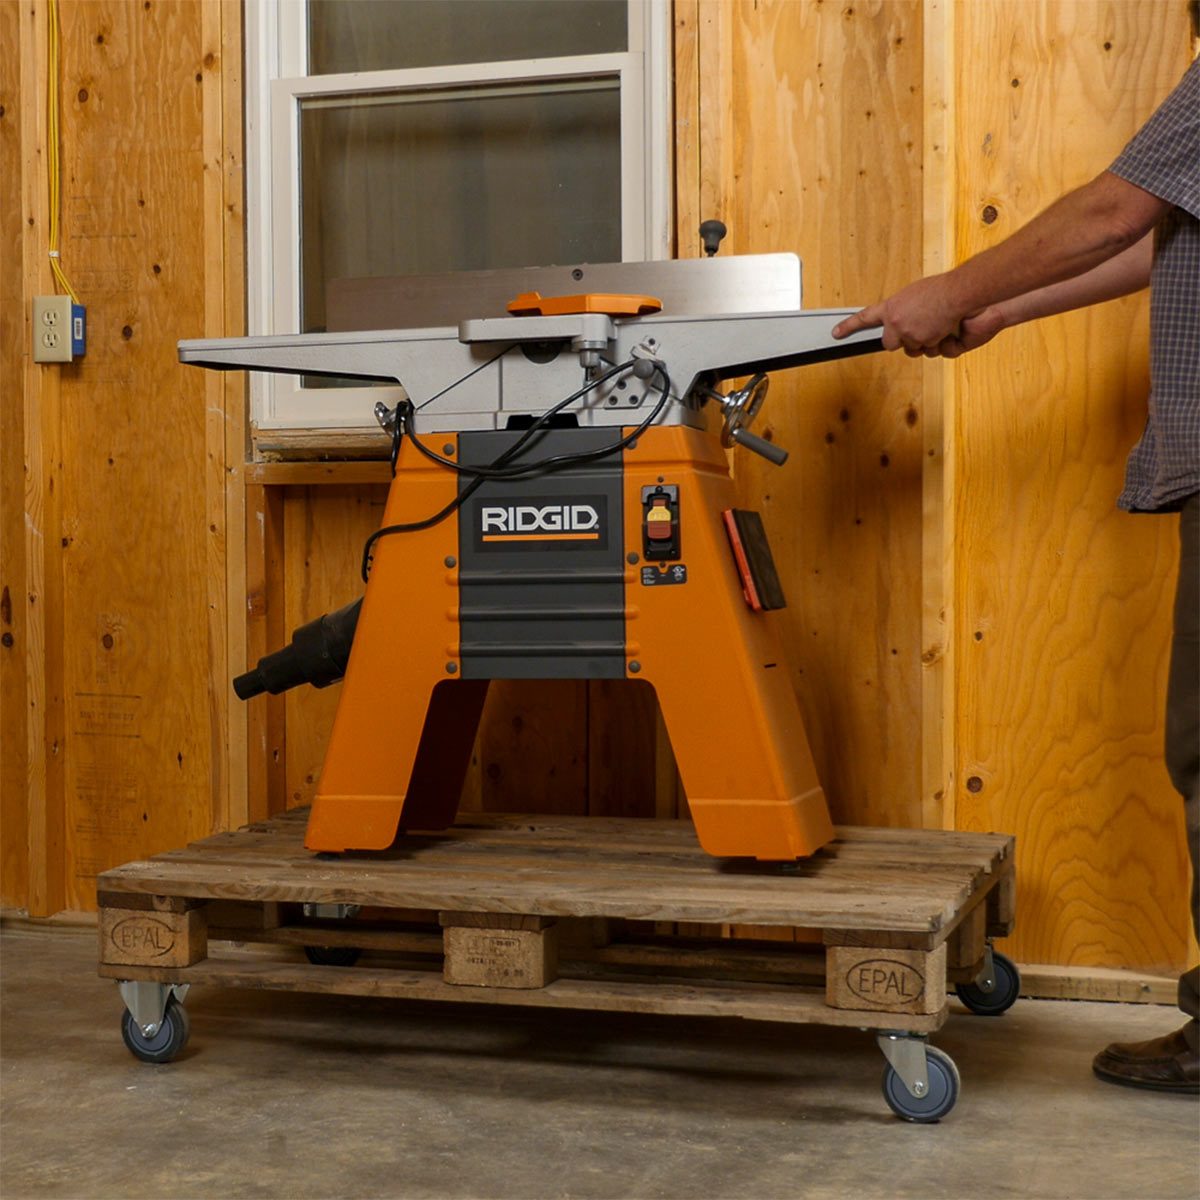 How to Build a Pallet Dolly